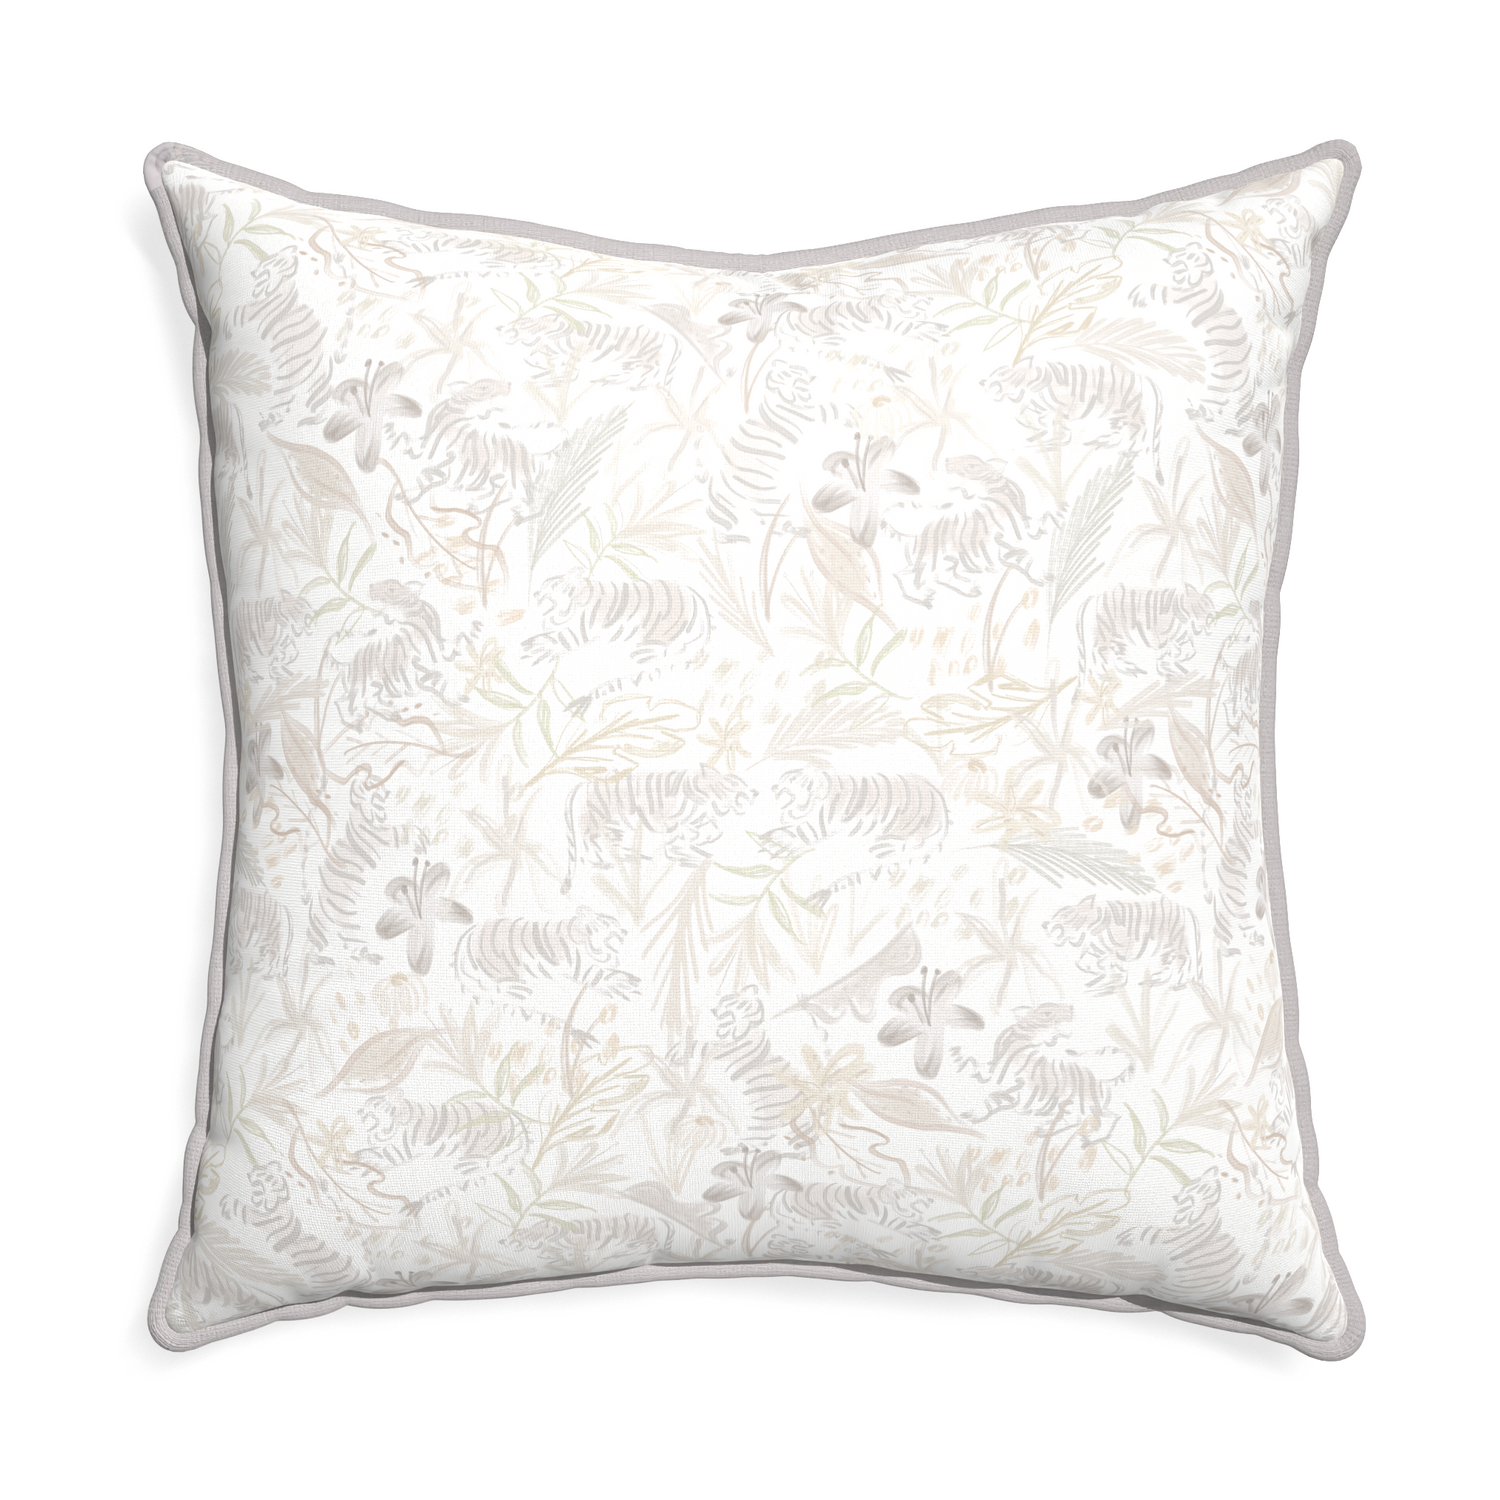 Euro-sham frida sand custom beige chinoiserie tigerpillow with pebble piping on white background